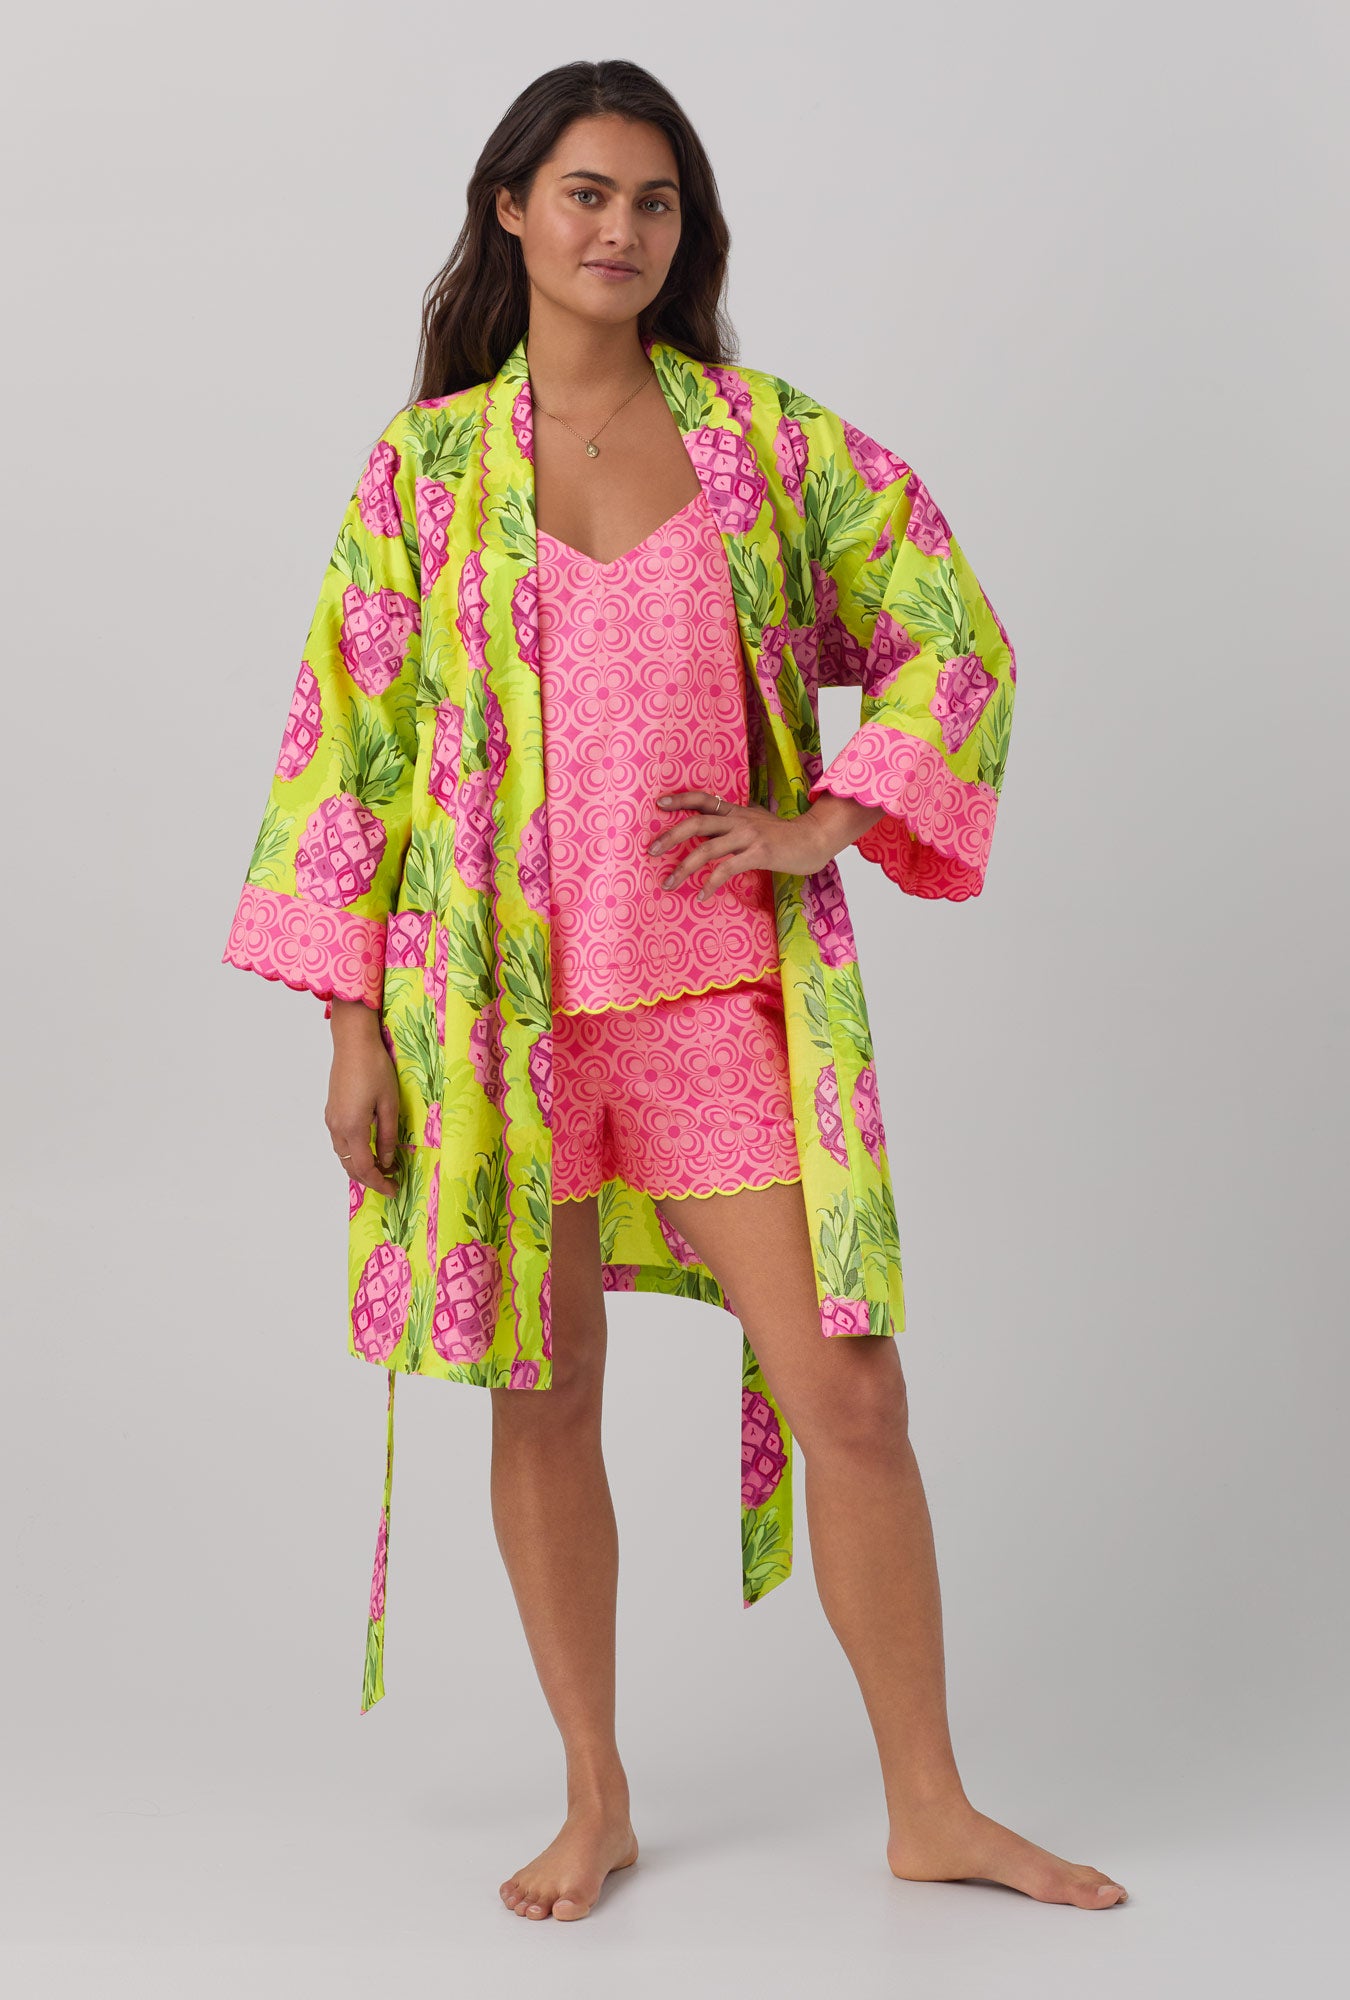 A lady wearing long sleeve woven cotton robe with kiwi pineapple print